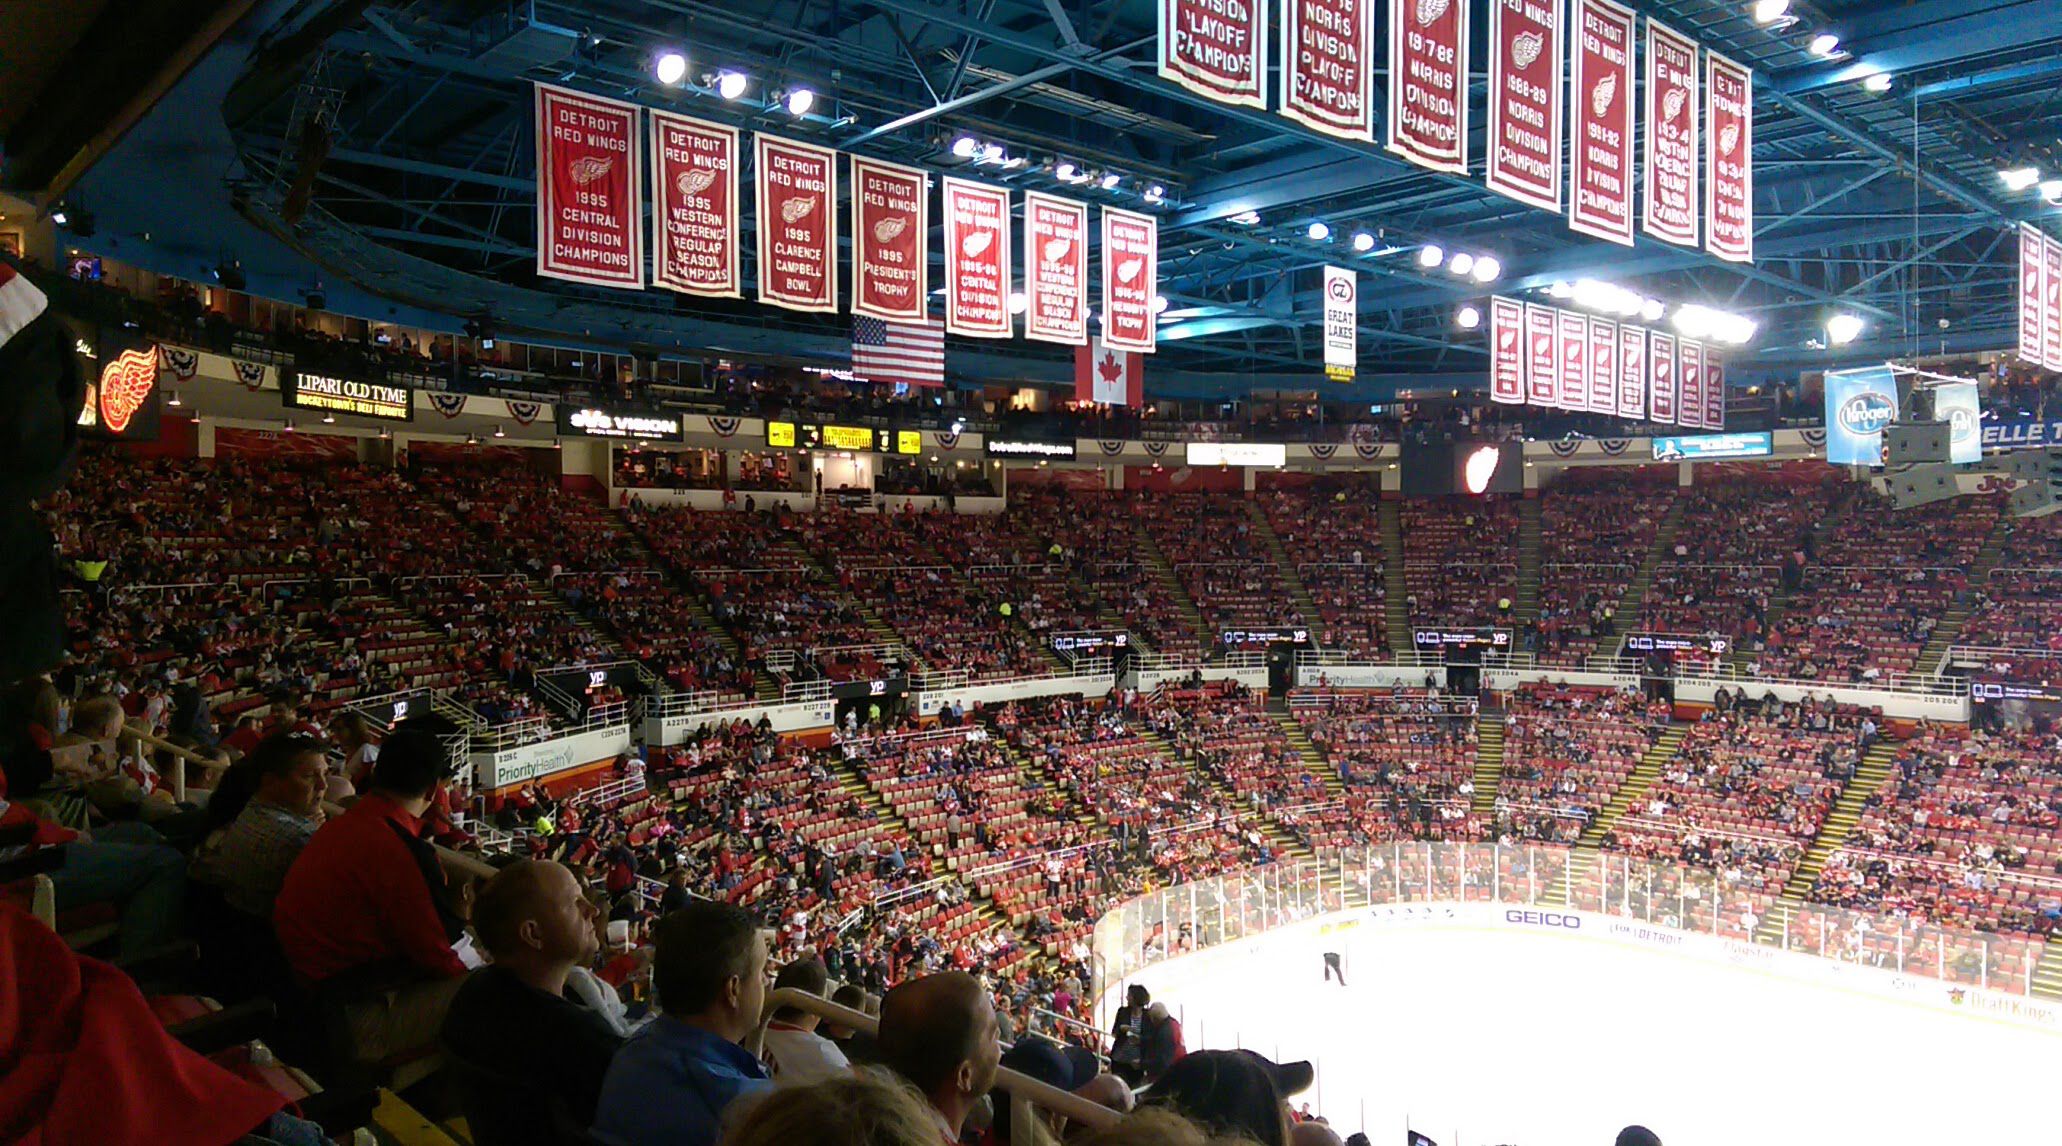 Joe Louis Arena demolition to start soon: What's coming down